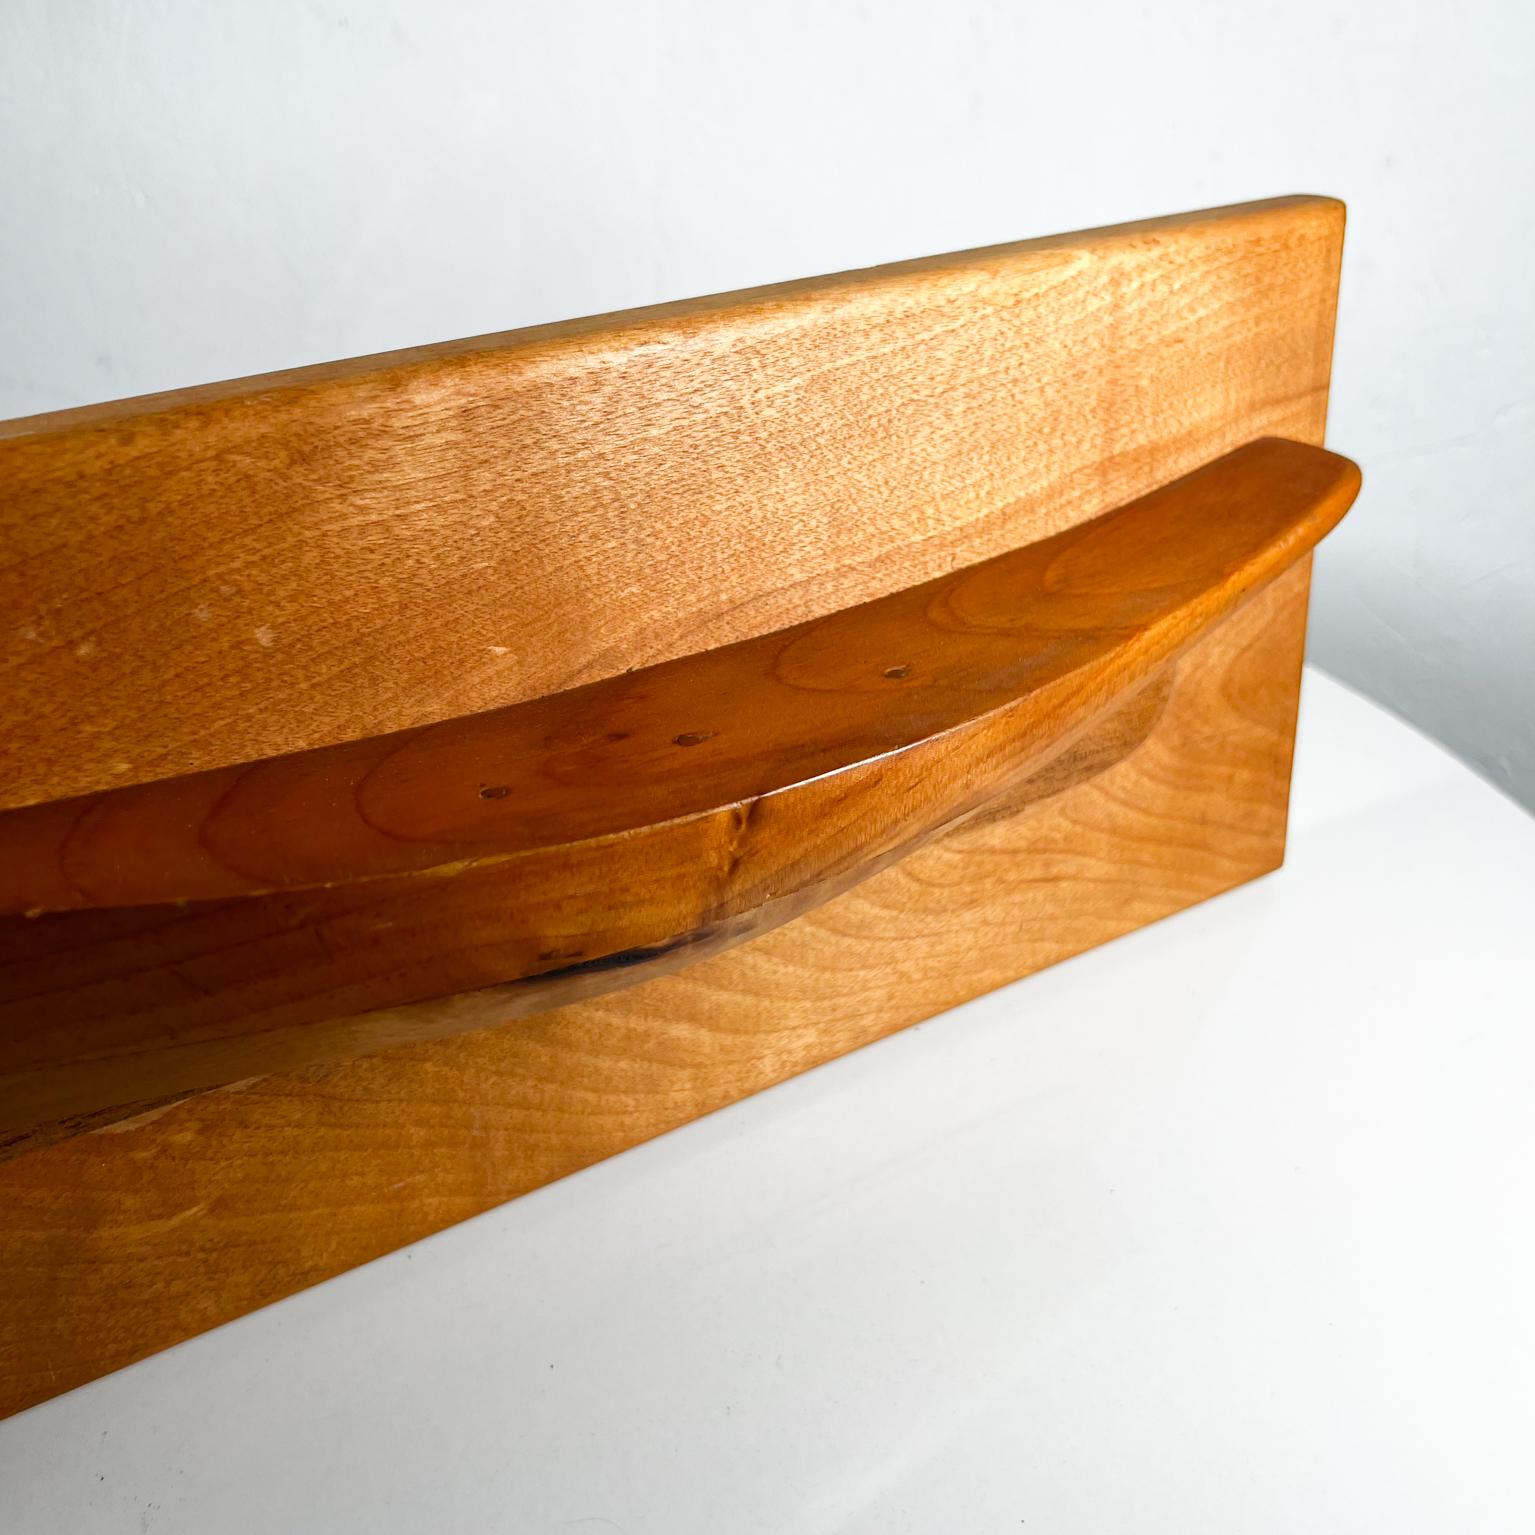 20th Century 1980s Modernist Art Exotic Maple Wood Boat Sculpture